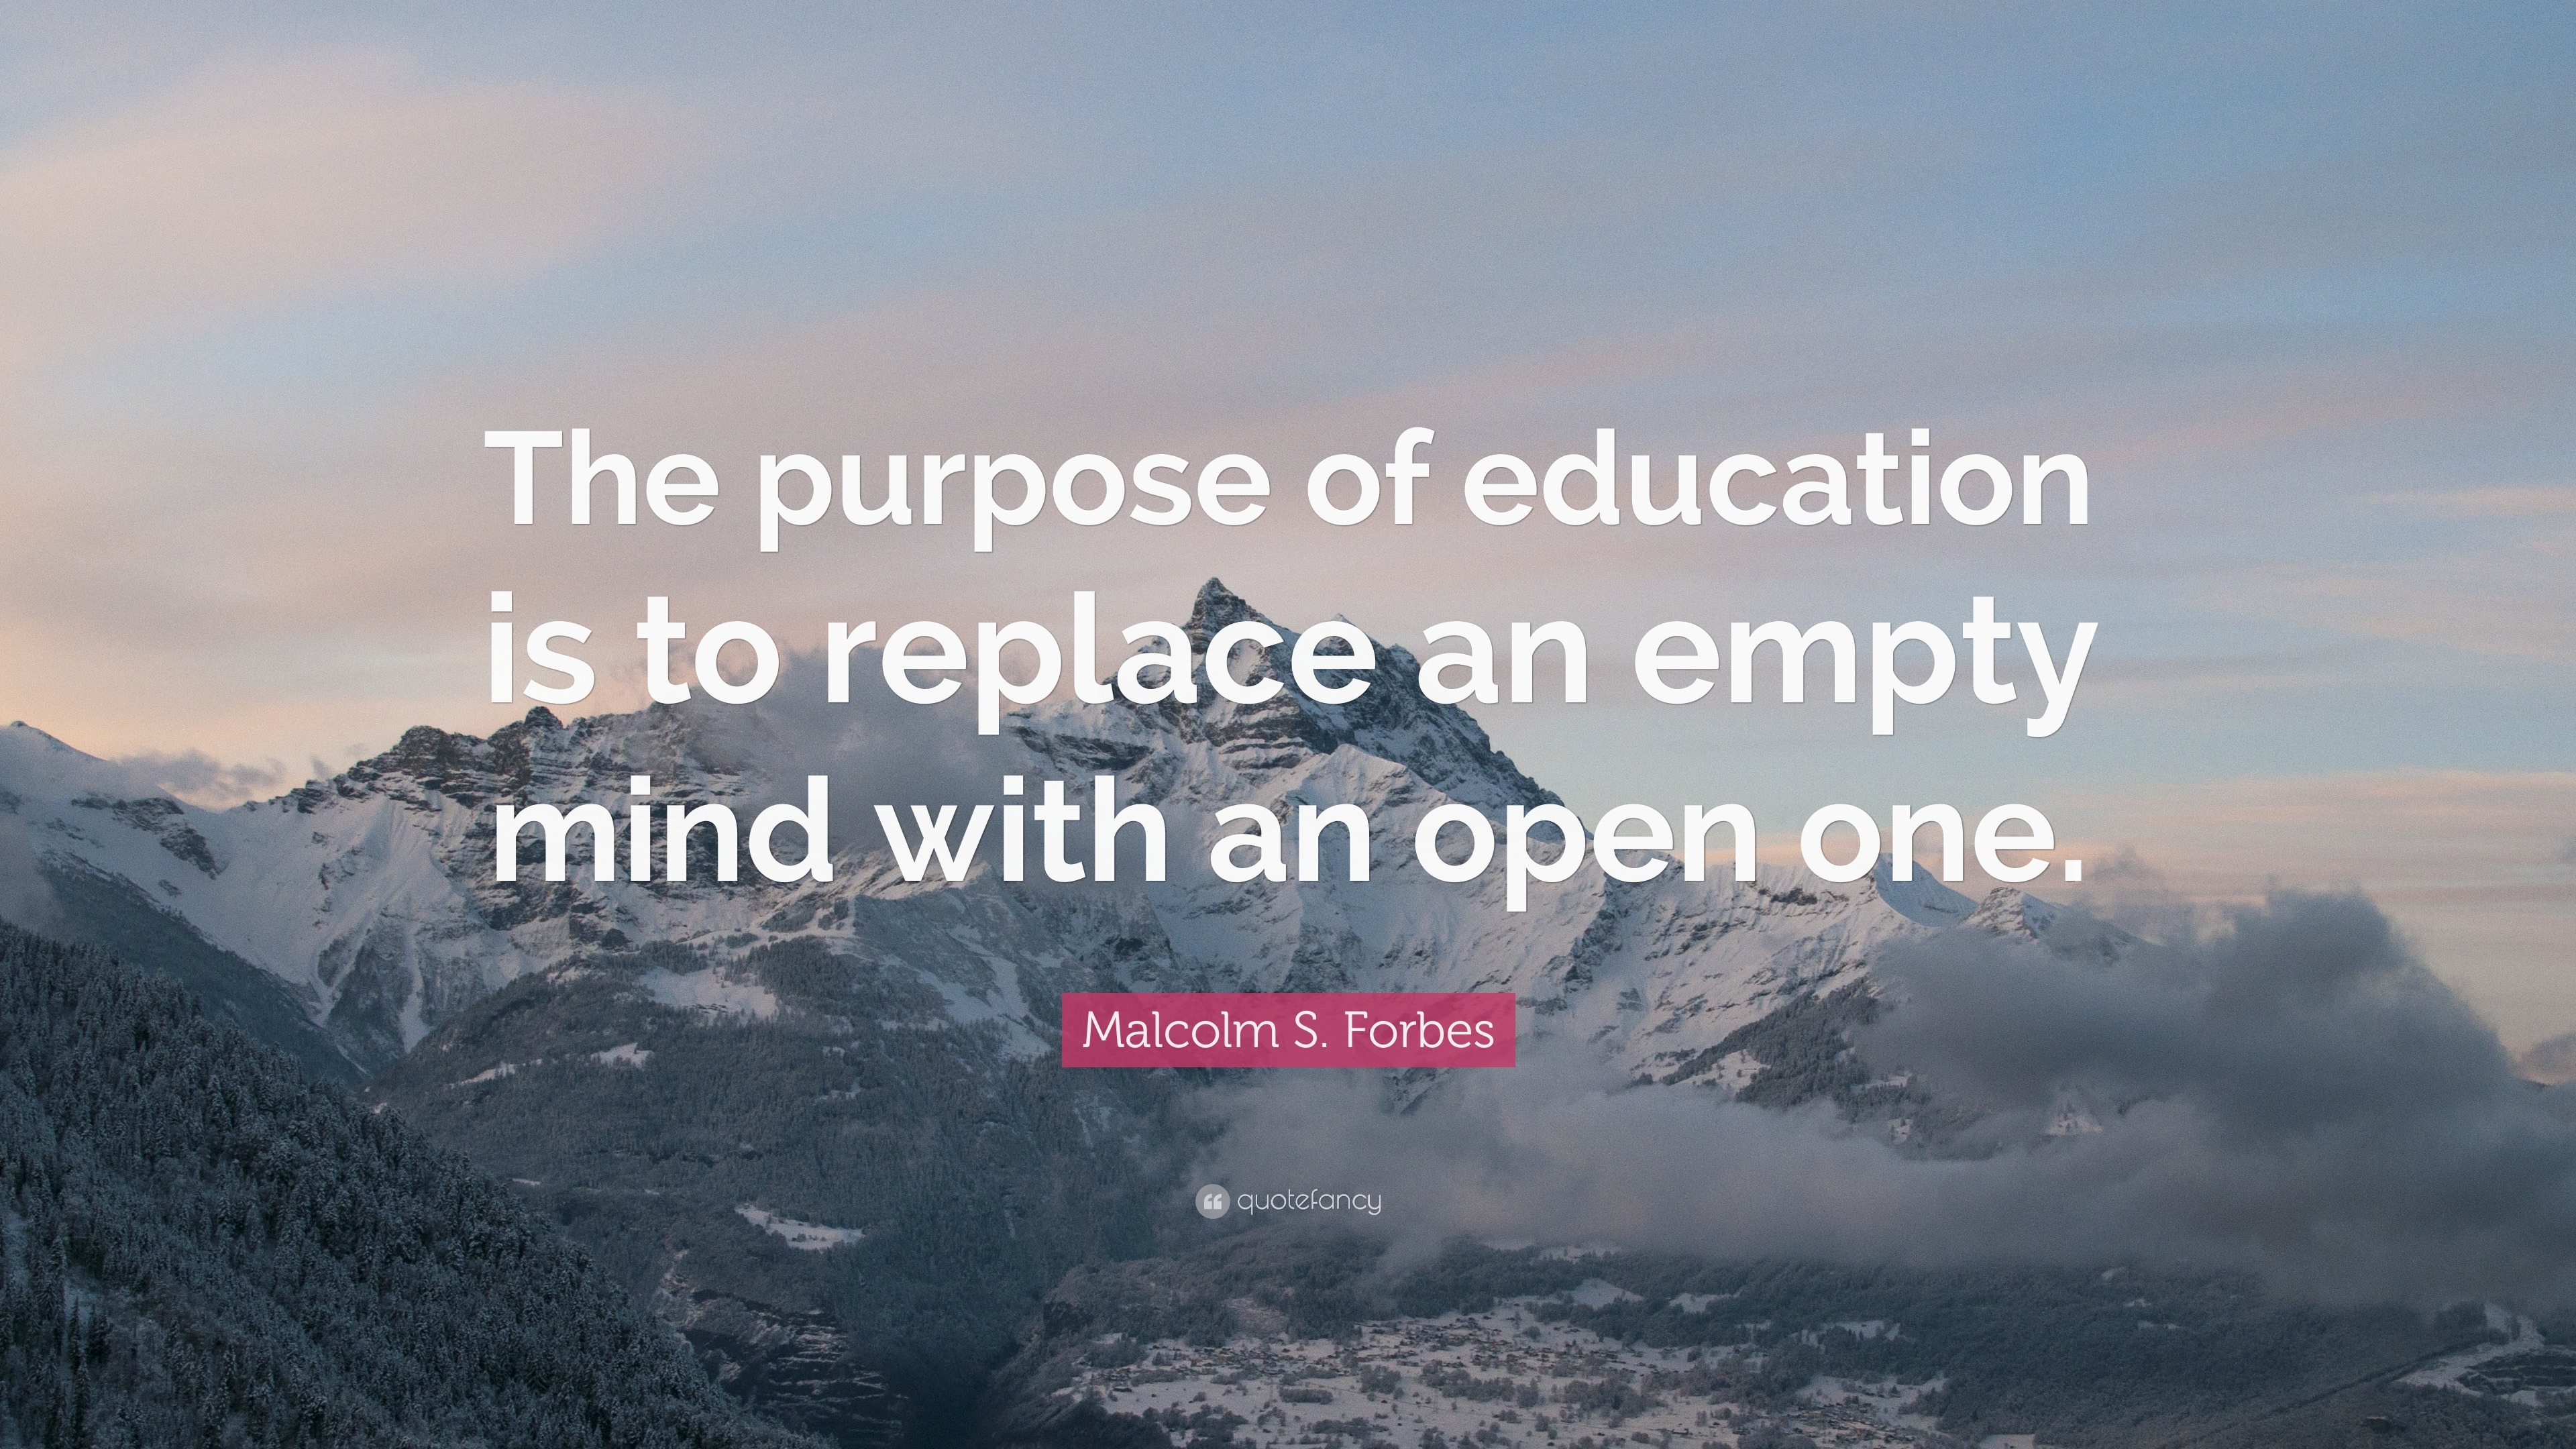 Education Quotes (40 wallpapers) - Quotefancy